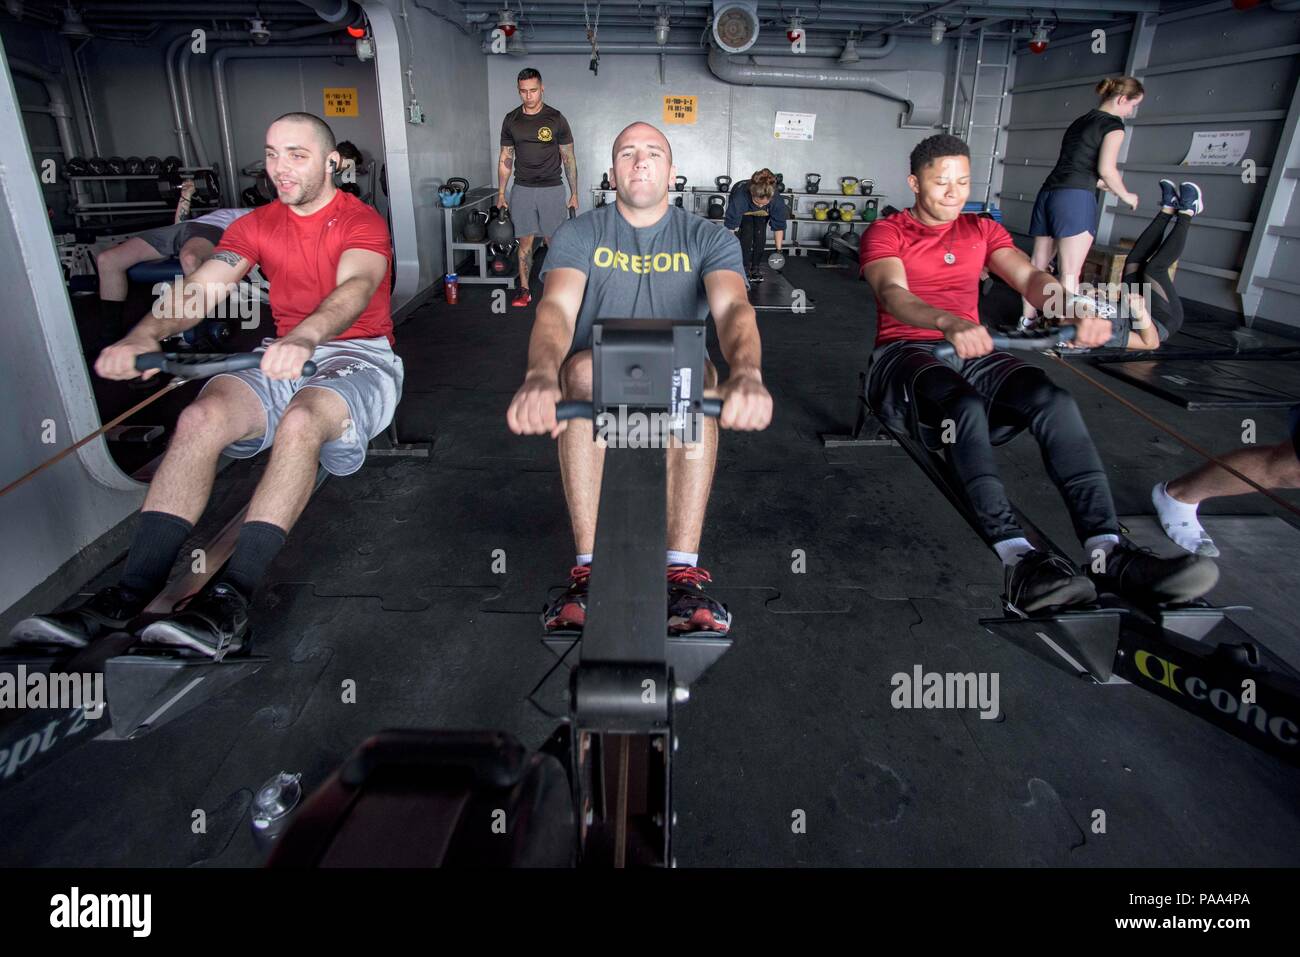 160322-N-KK394-030 ATLANTIC OCEAN (March 22, 2016) - Sailors use rowing  machines in the seaside gym of the aircraft carrier USS Dwight D.  Eisenhower (CVN 69), the flagship of the Eisenhower Carrier Strike